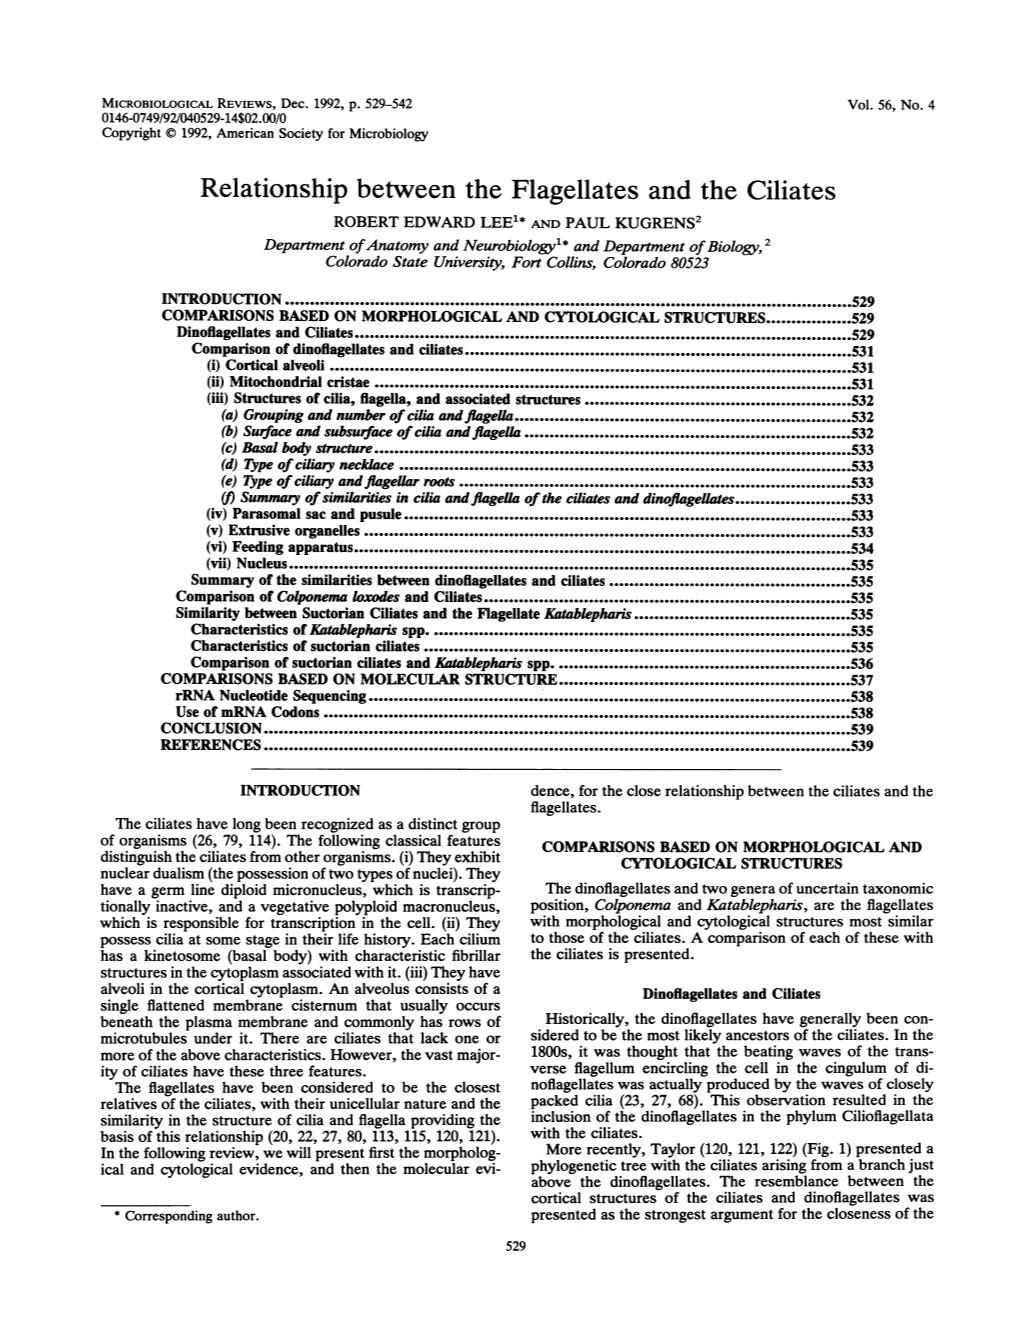 Relationship Between the Flagellates Andthe Ciliates